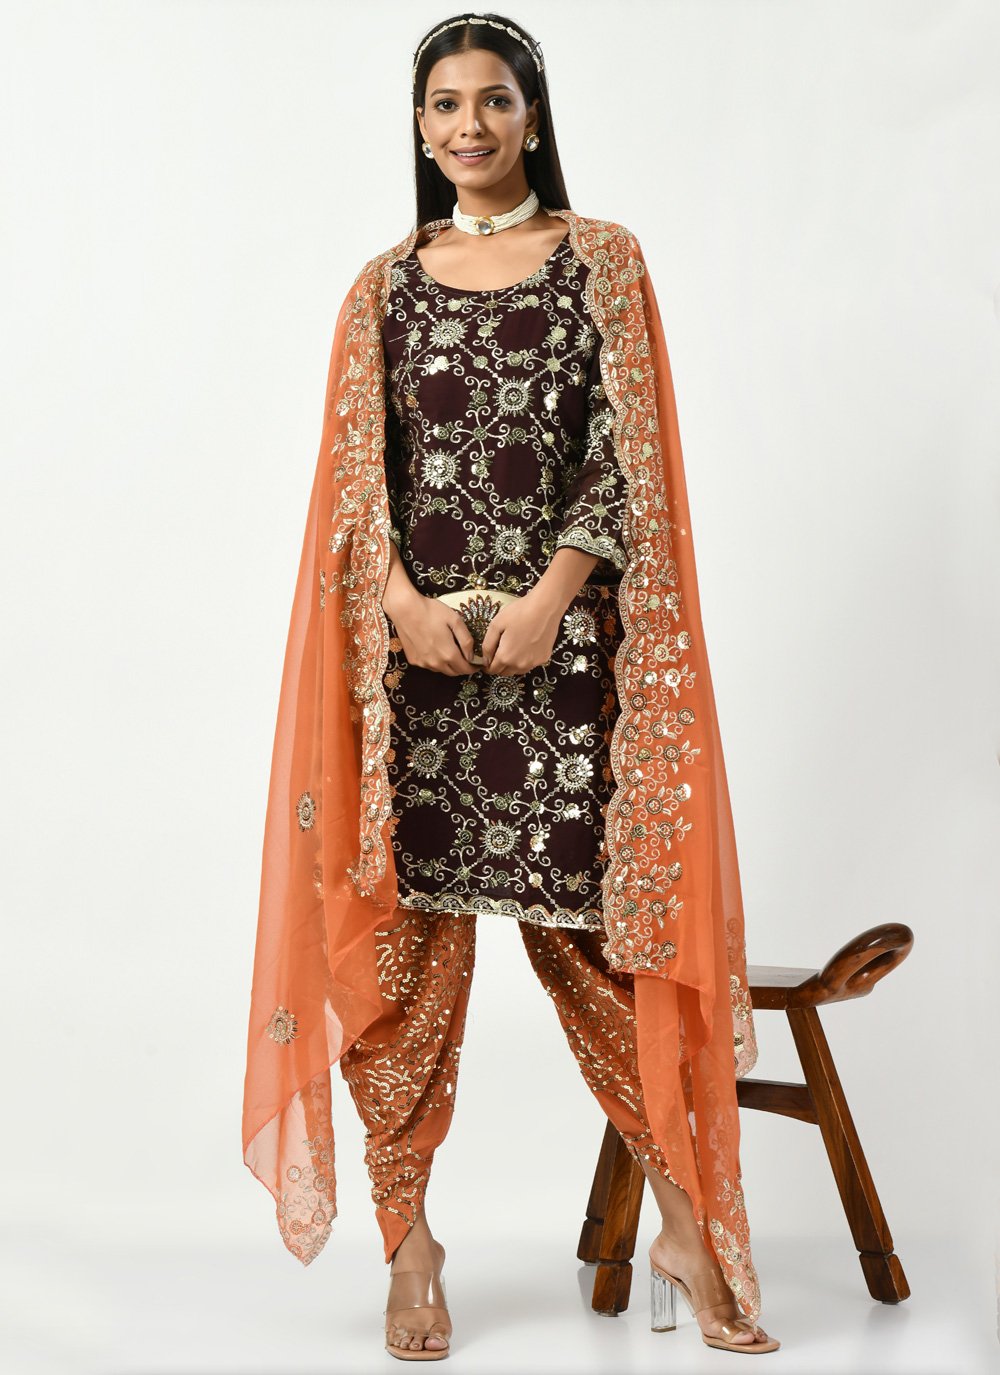 Off White Embroidered Readymade Punjabi Salwar Suit, 60% OFF